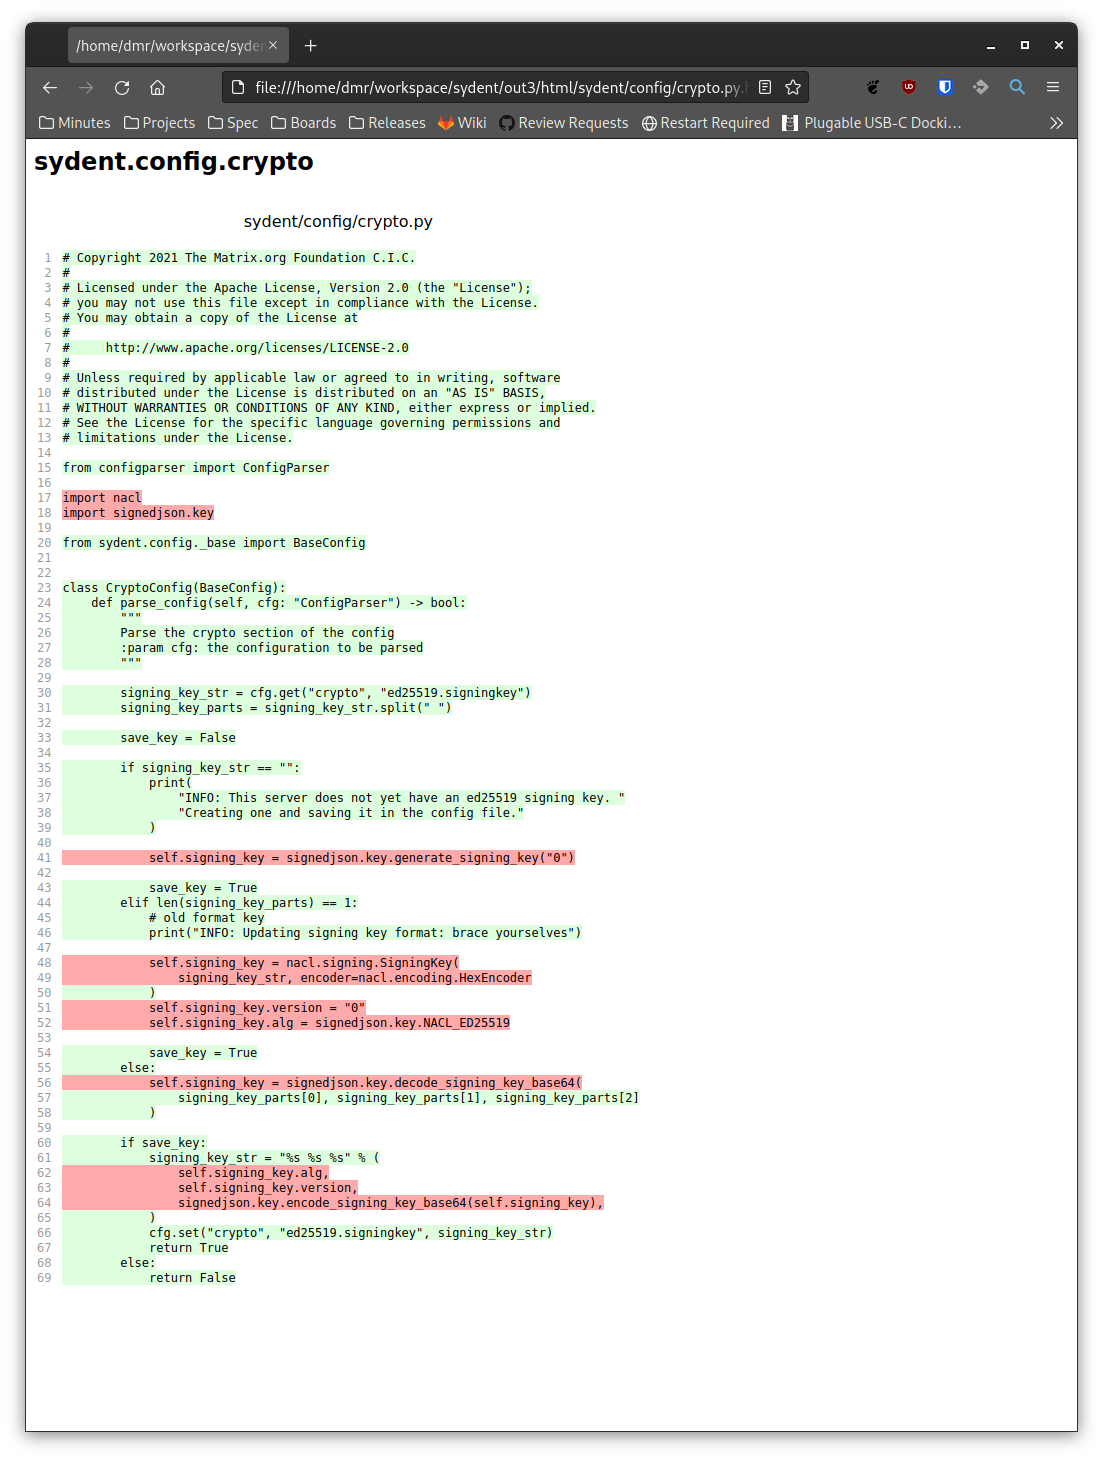 HTML report, module page. Most lines of source code are highlighted green; a minority are highlighted red.